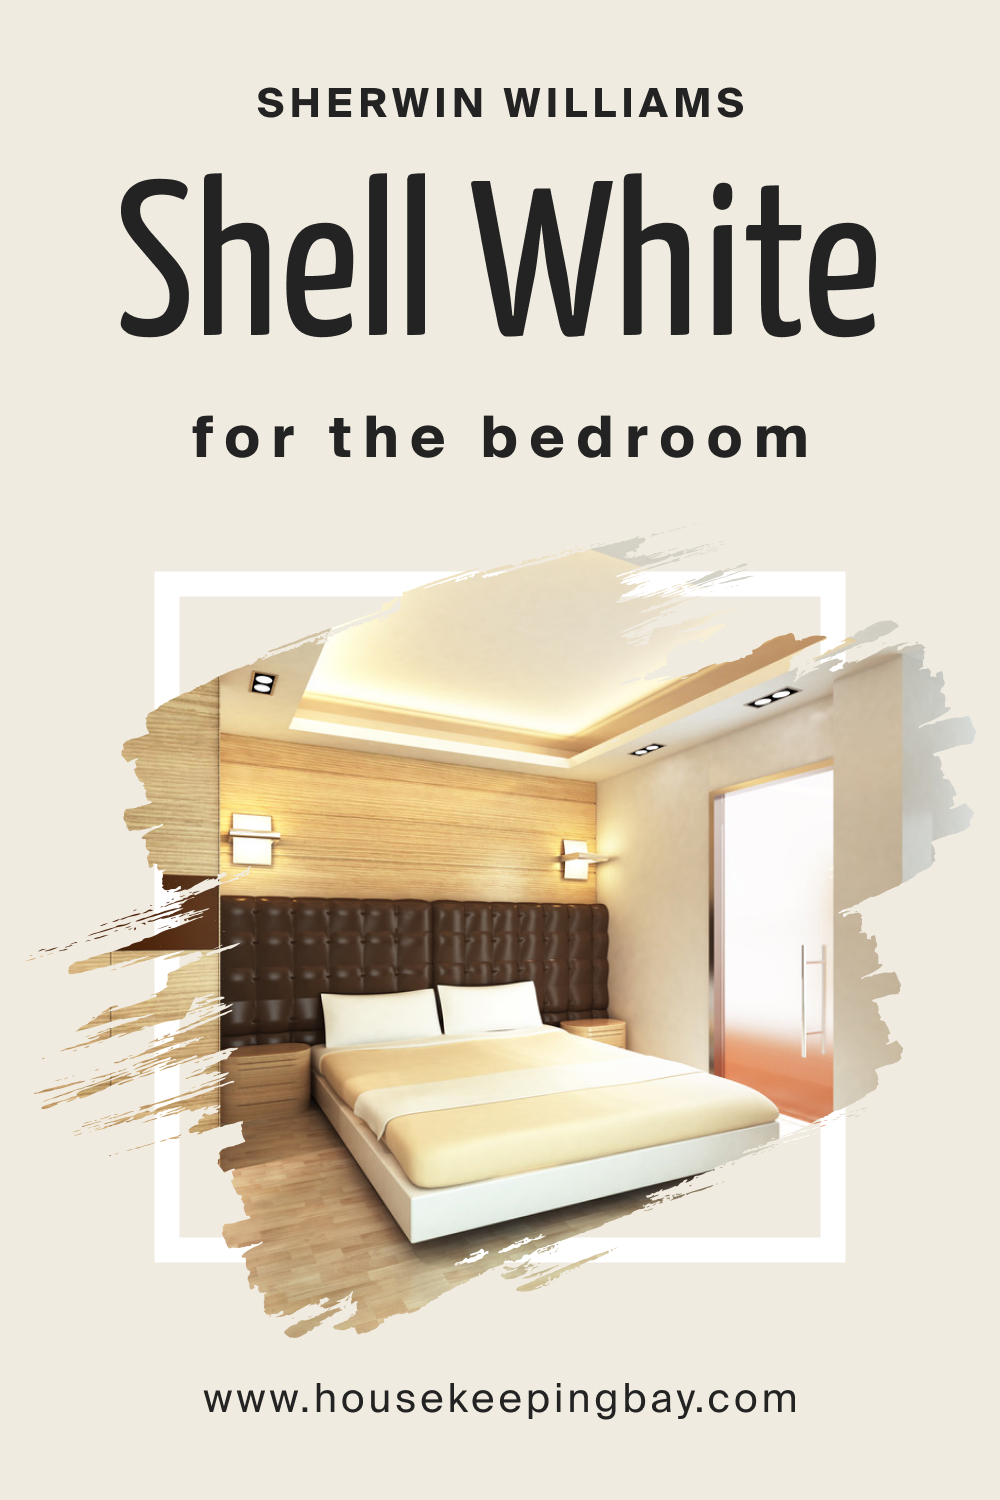 Sherwin Williams. SW Shell White For the bedroom